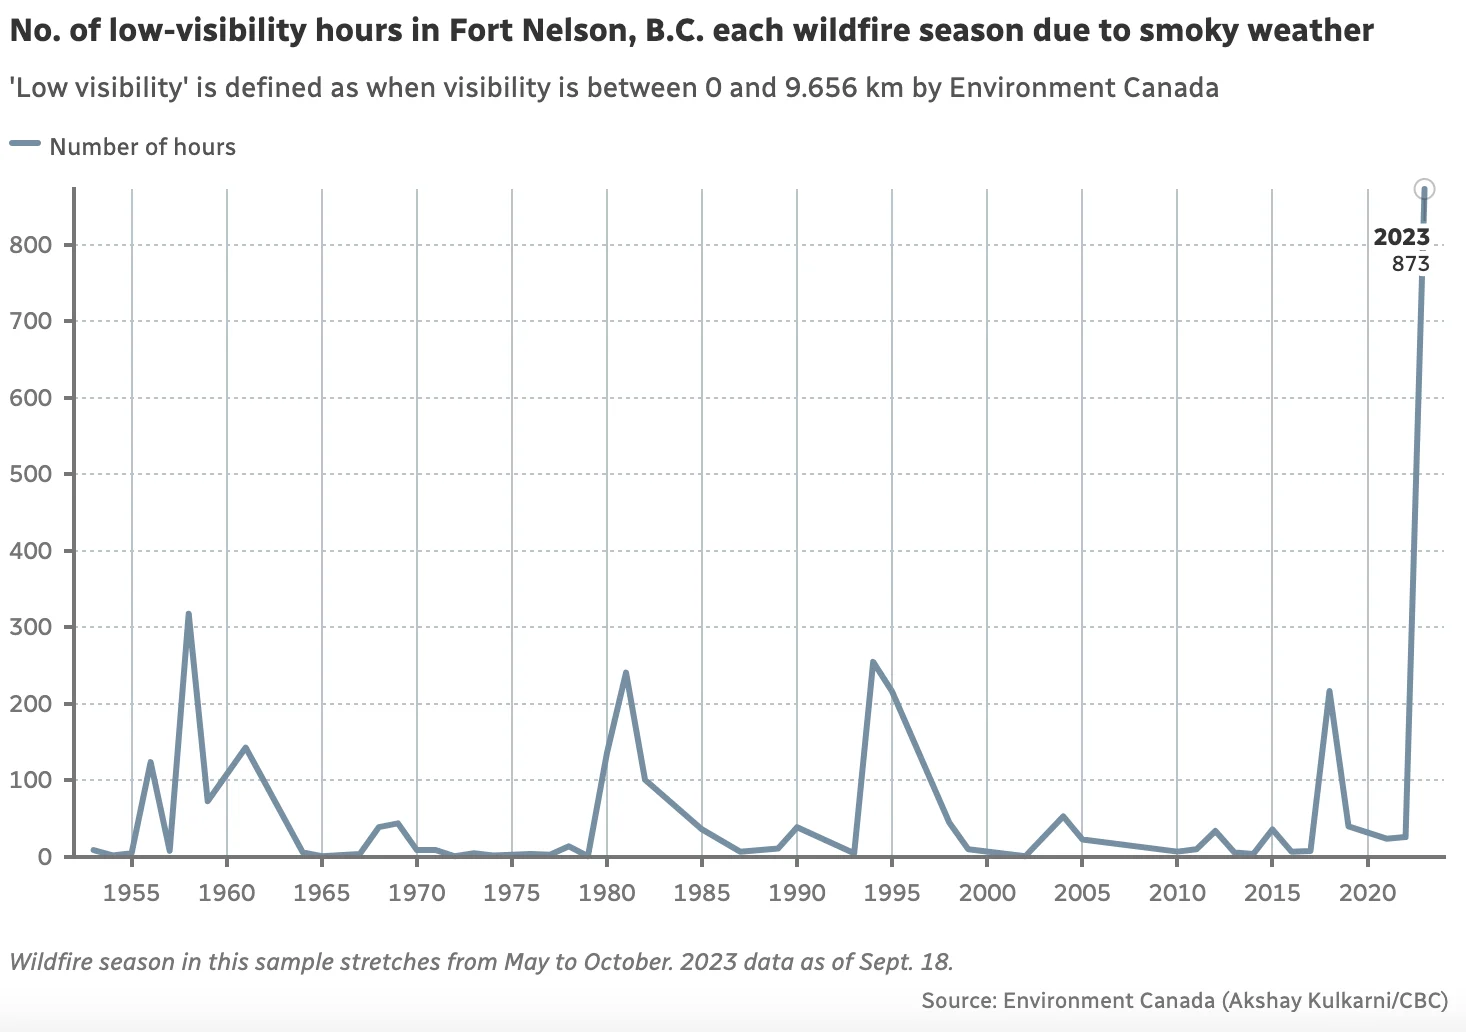 CBC: No. of low-visibility hours in Fort Nelson, B.C. each wildfire season due to smoky weather